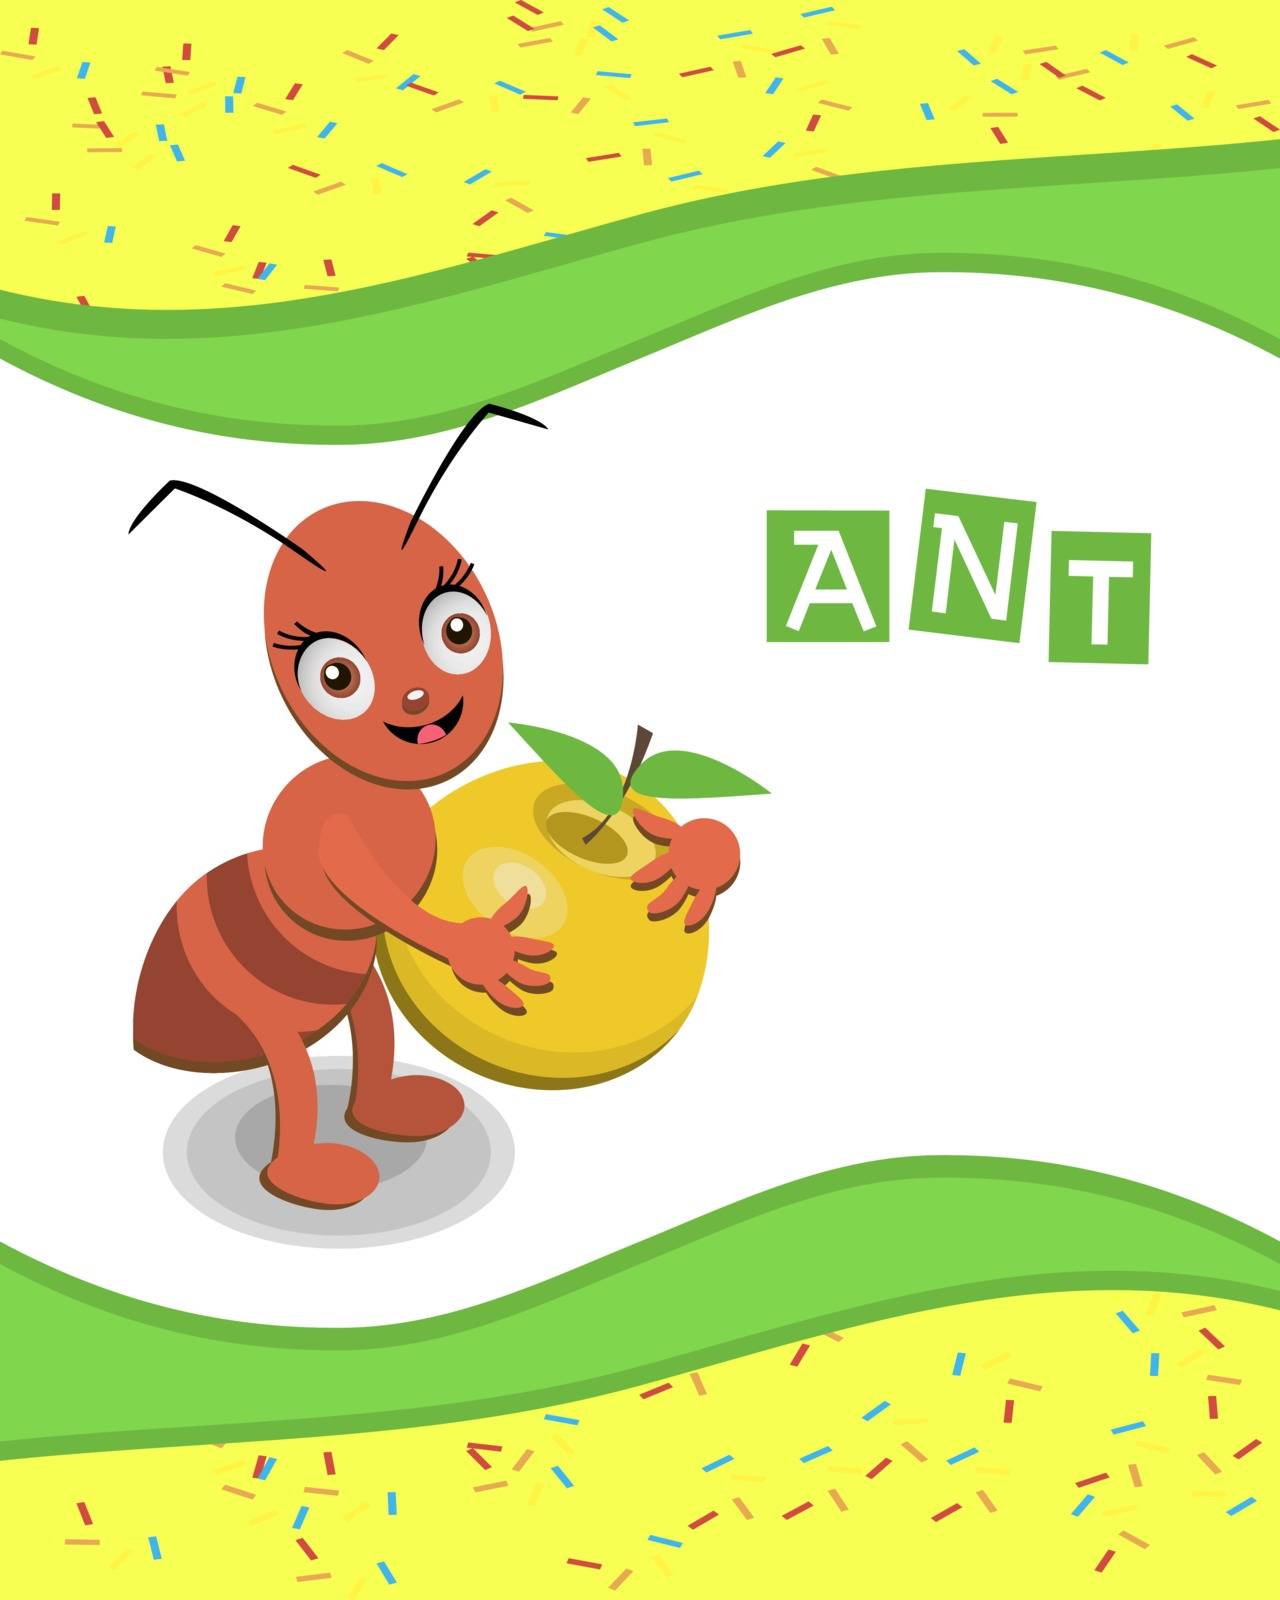 Ant from the collection of alphabet animals for your educational insights